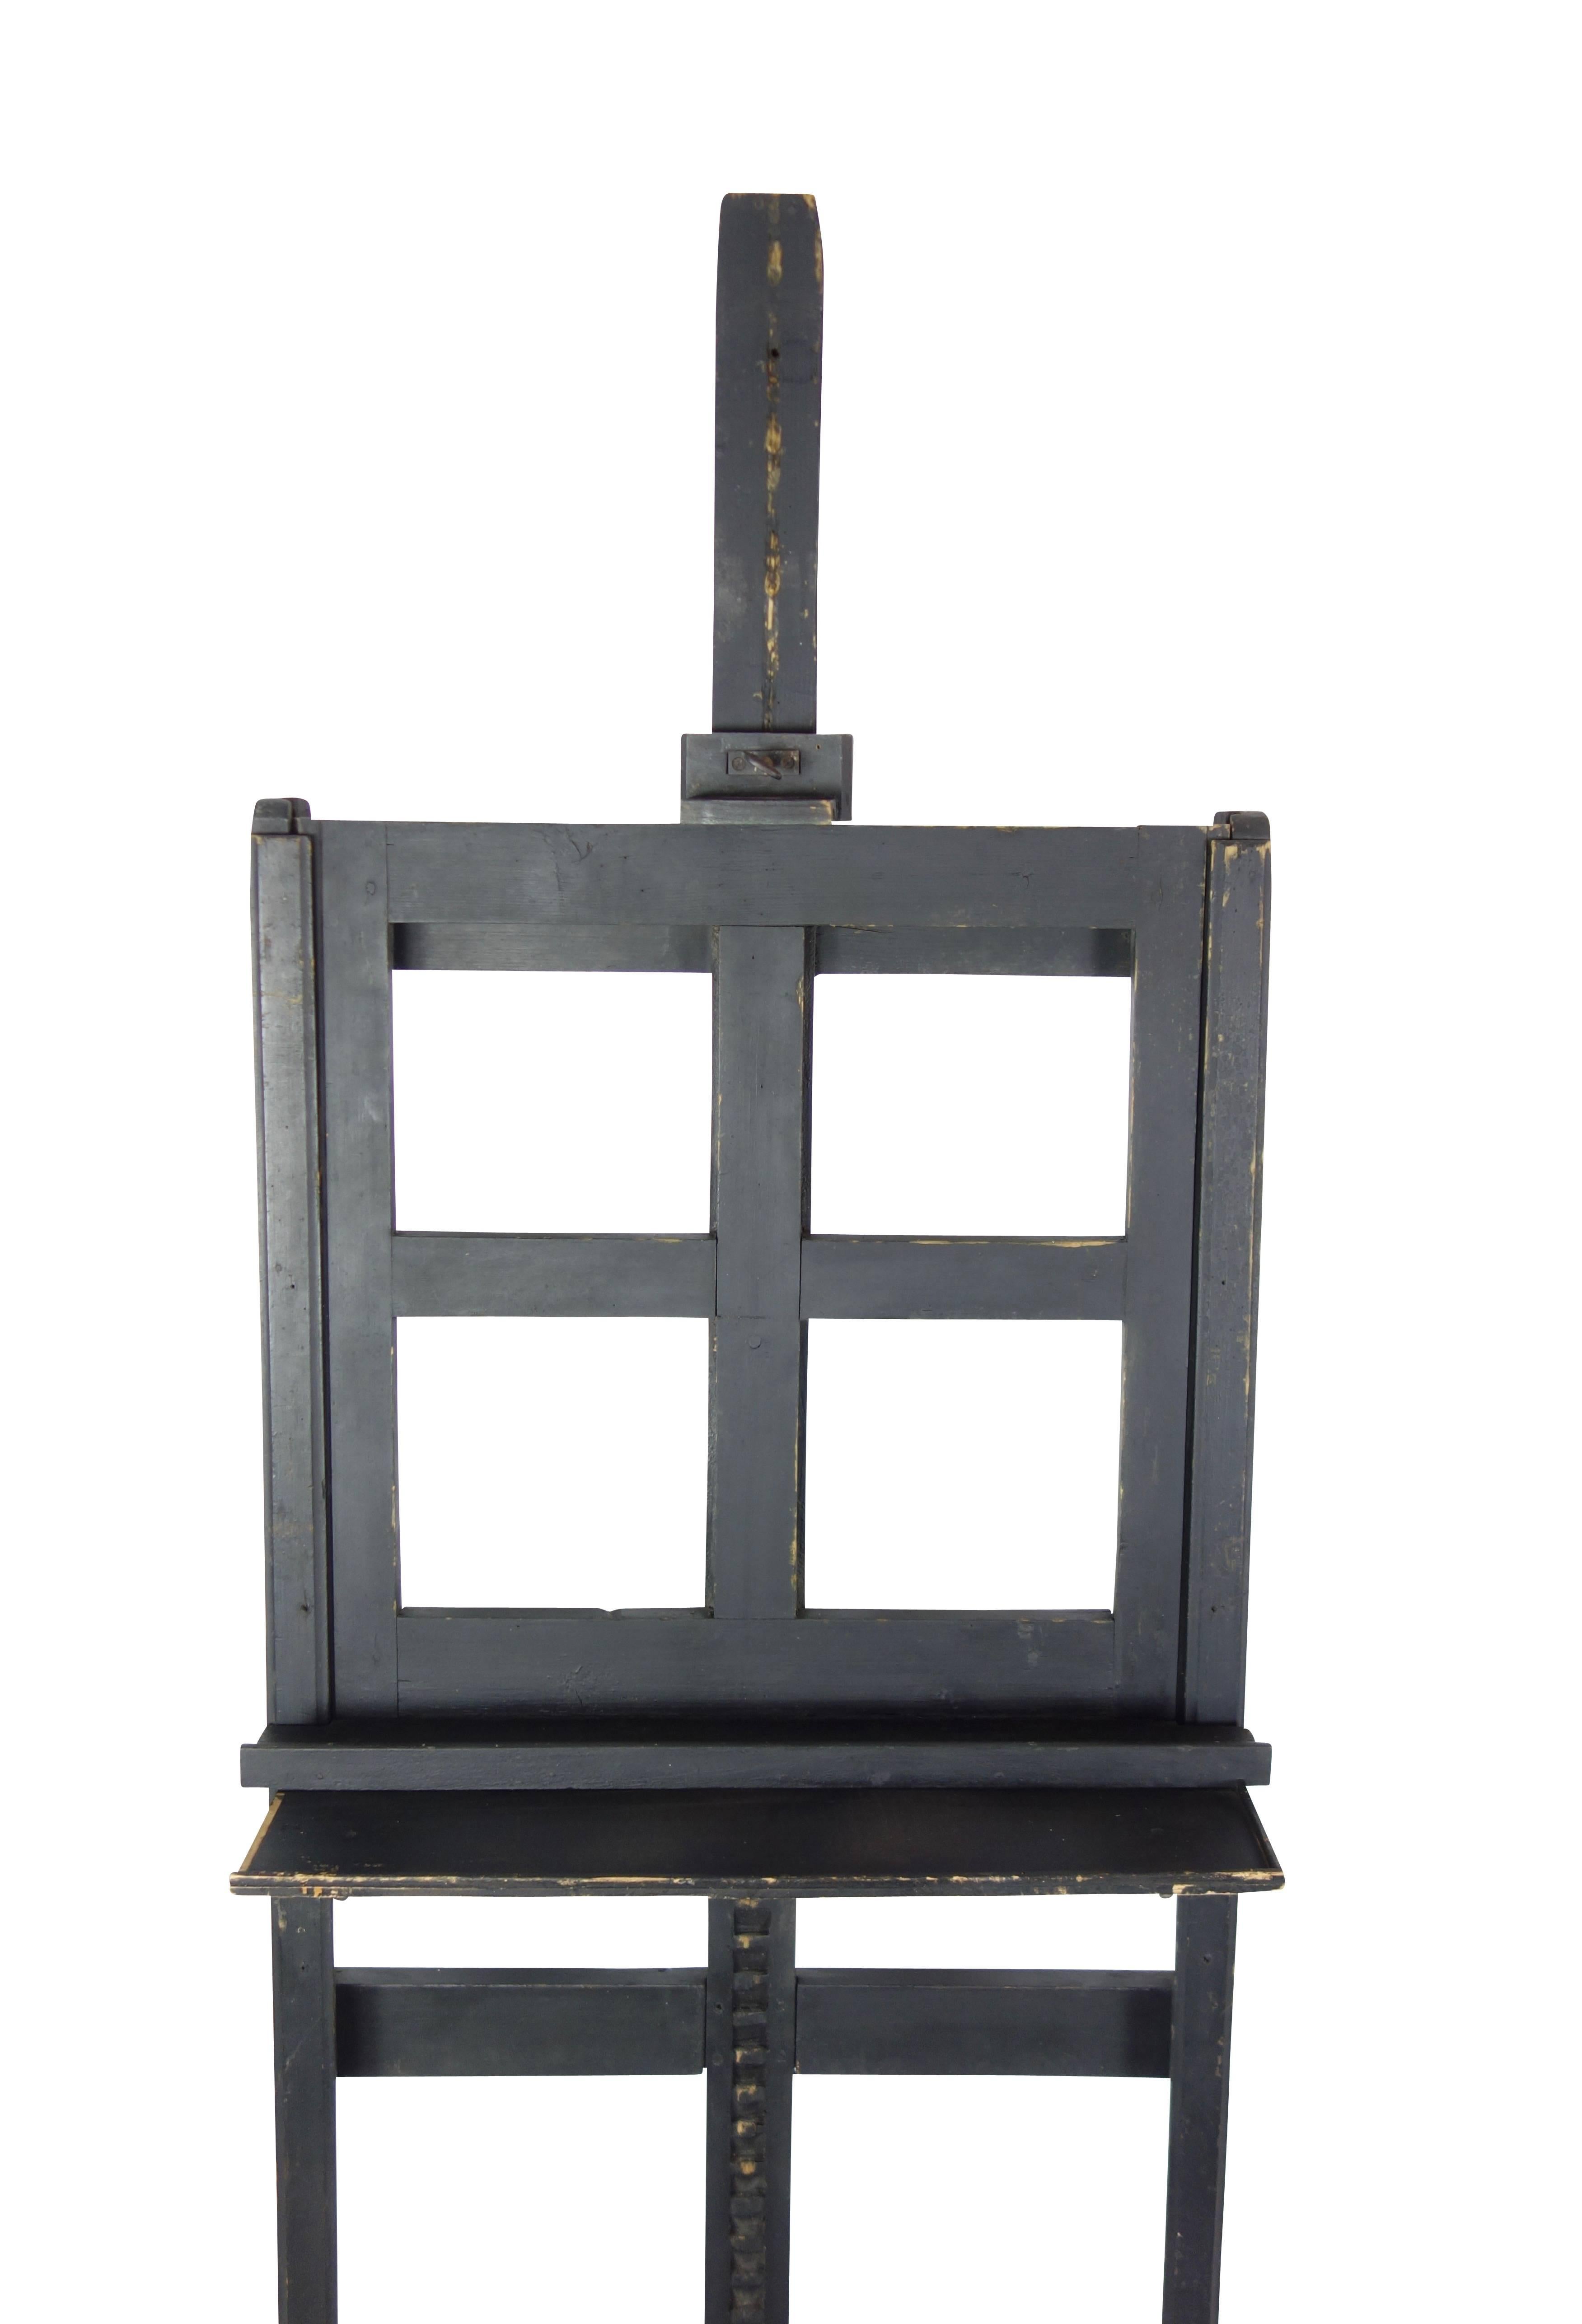 This is a single sided adjustable artists easel. Adjusts to a maximum height of 99